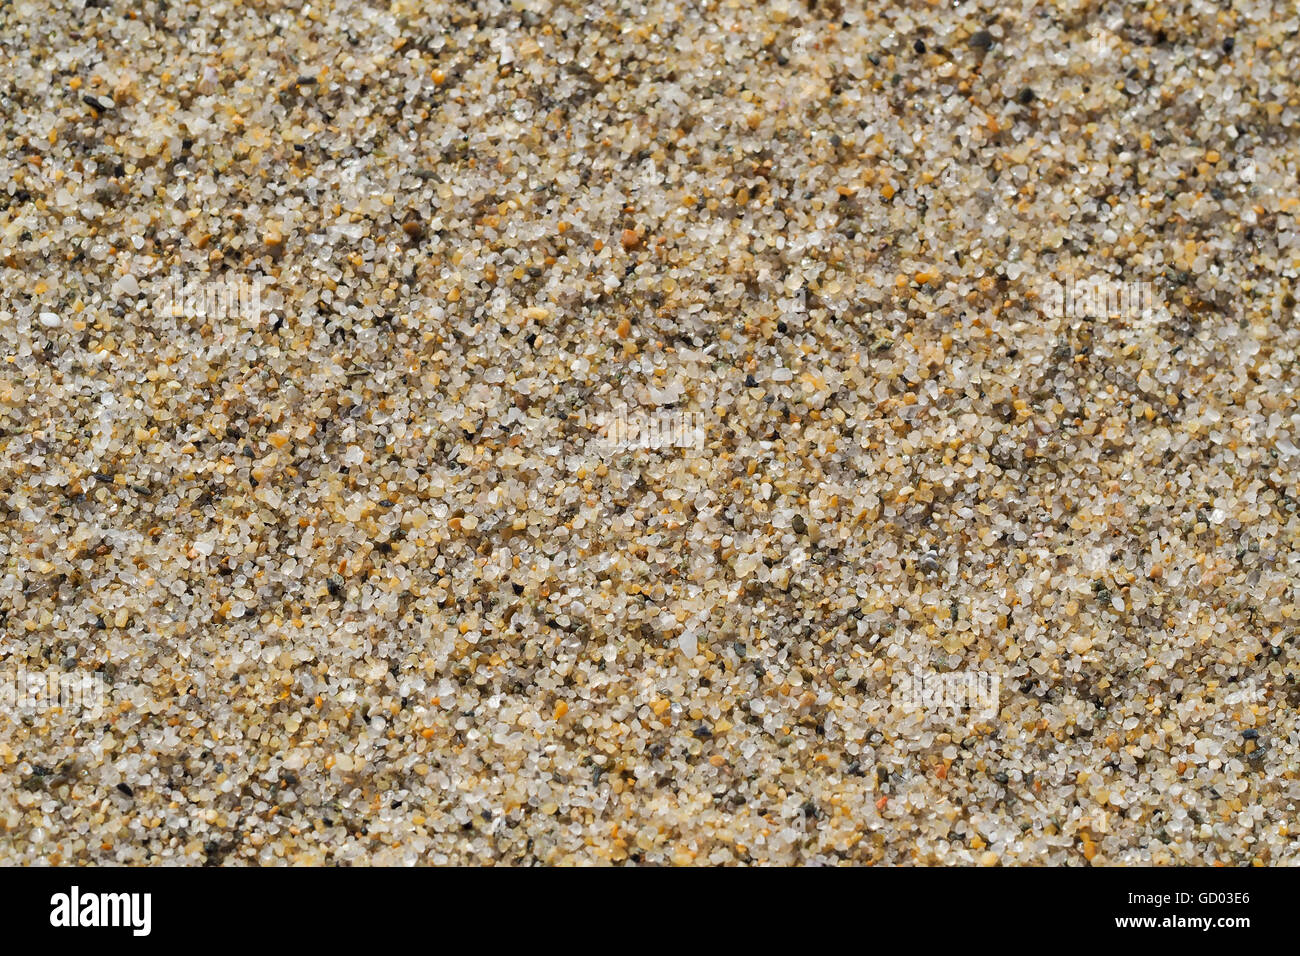 Texture of Sand Grains Close-up Stock Photo